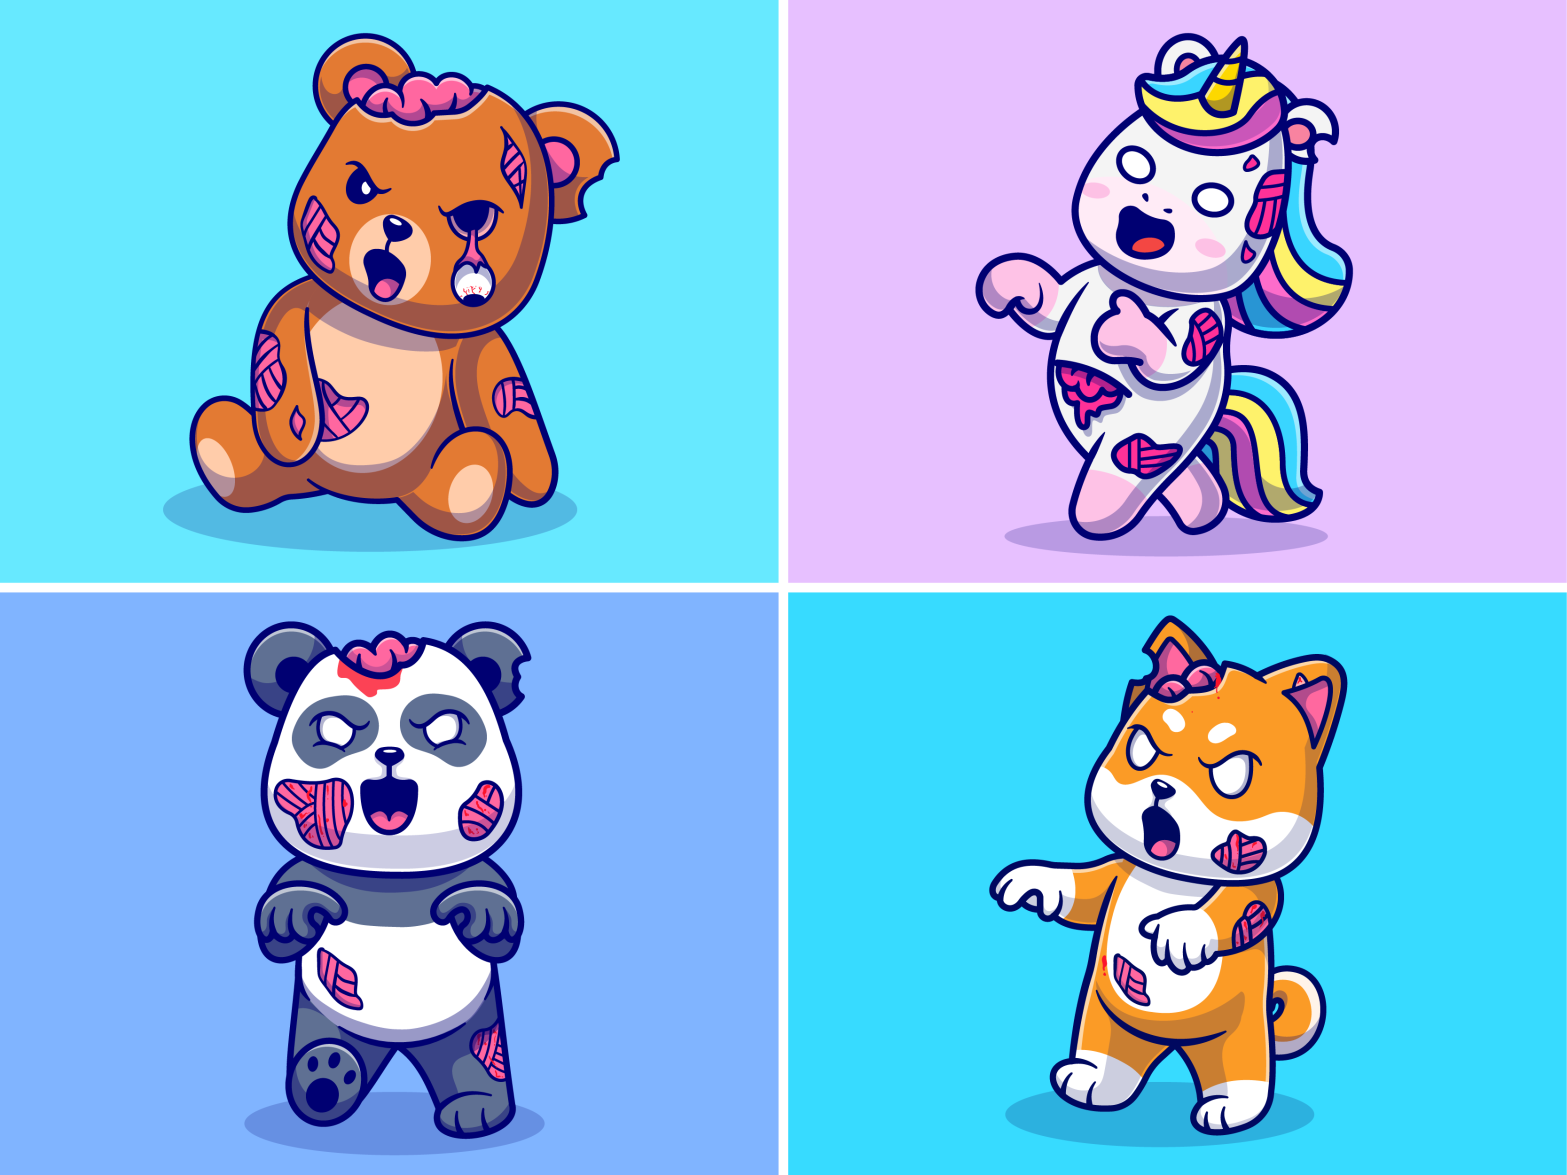 Animals zombie🐻🐼🧟‍♂️🐘🦄 by catalyst on Dribbble